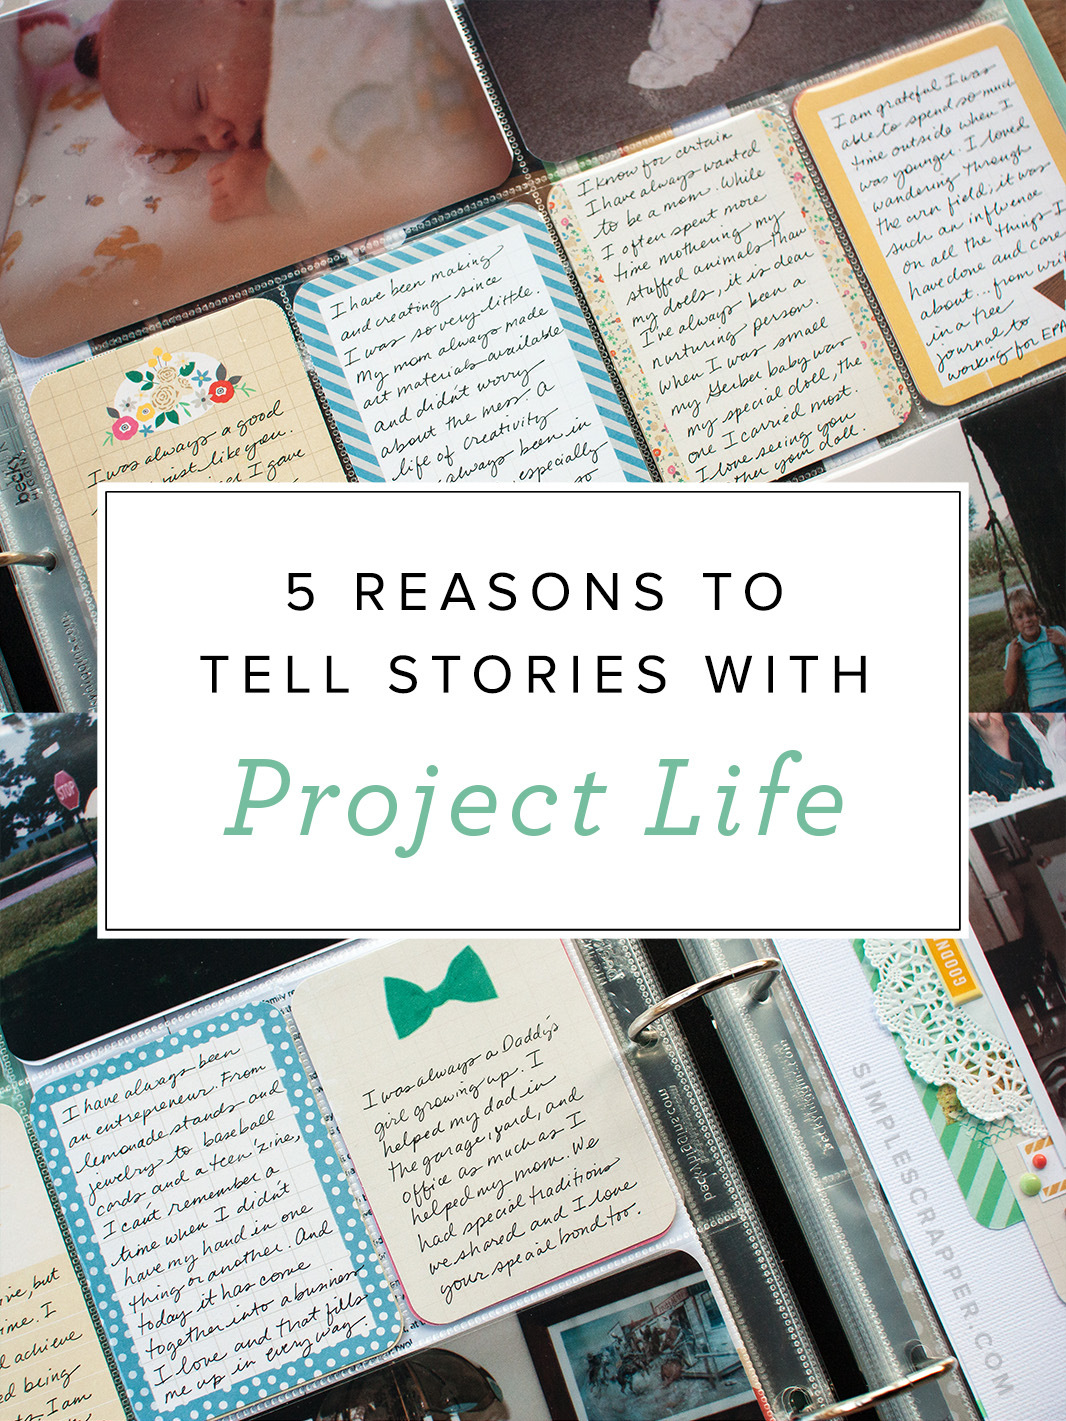 5 Reasons to Tell Stories with Project Life